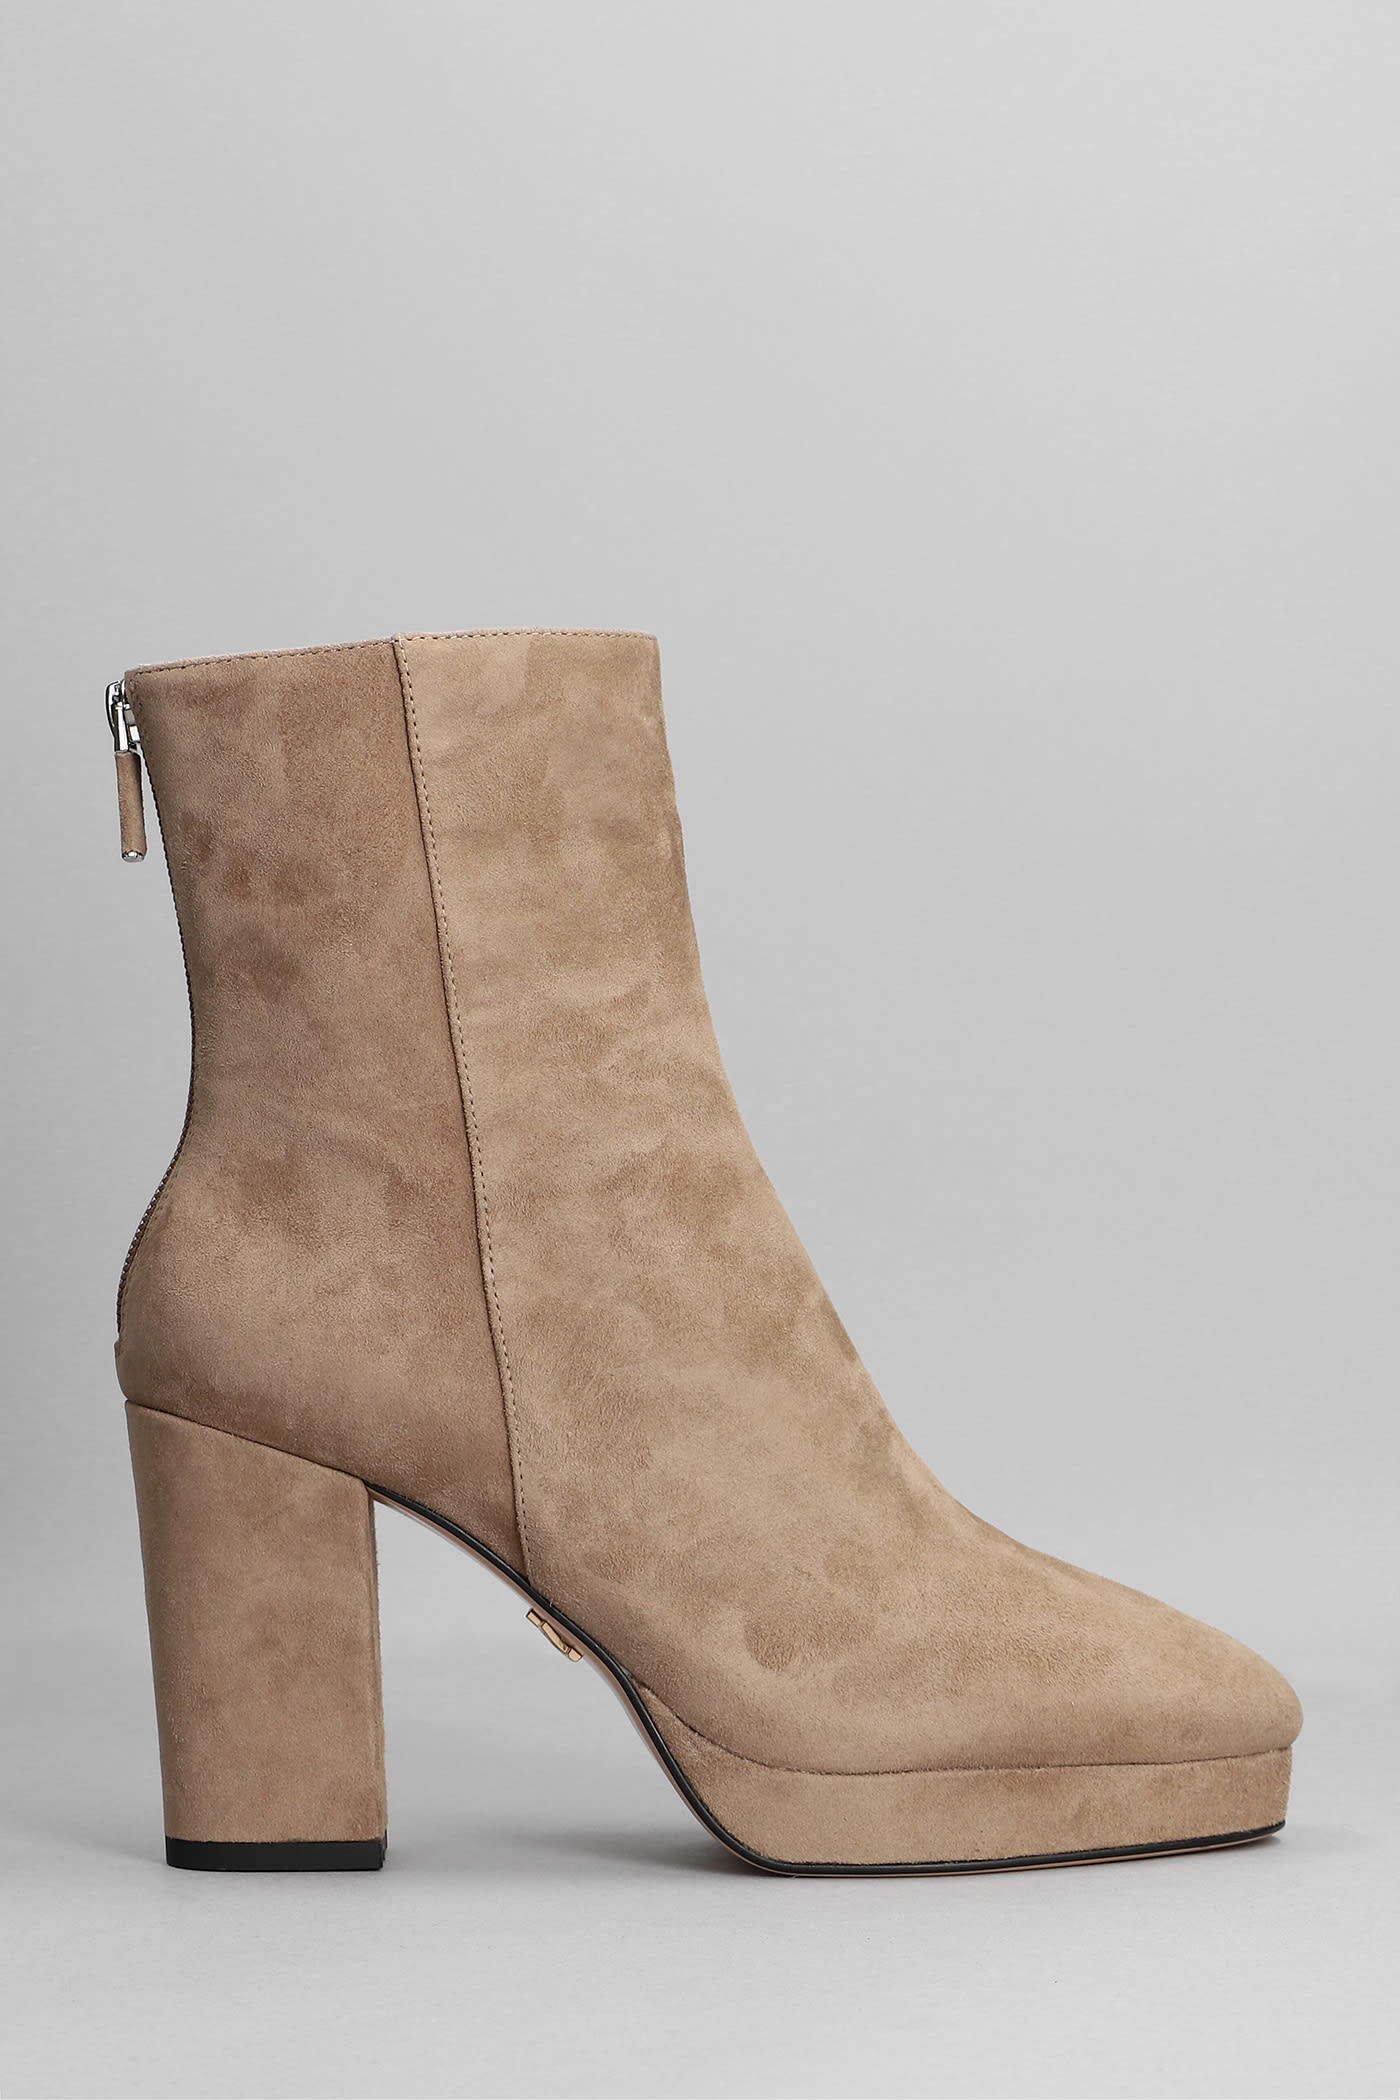 Lola Cruz High Heels Ankle Boots In Taupe Suede